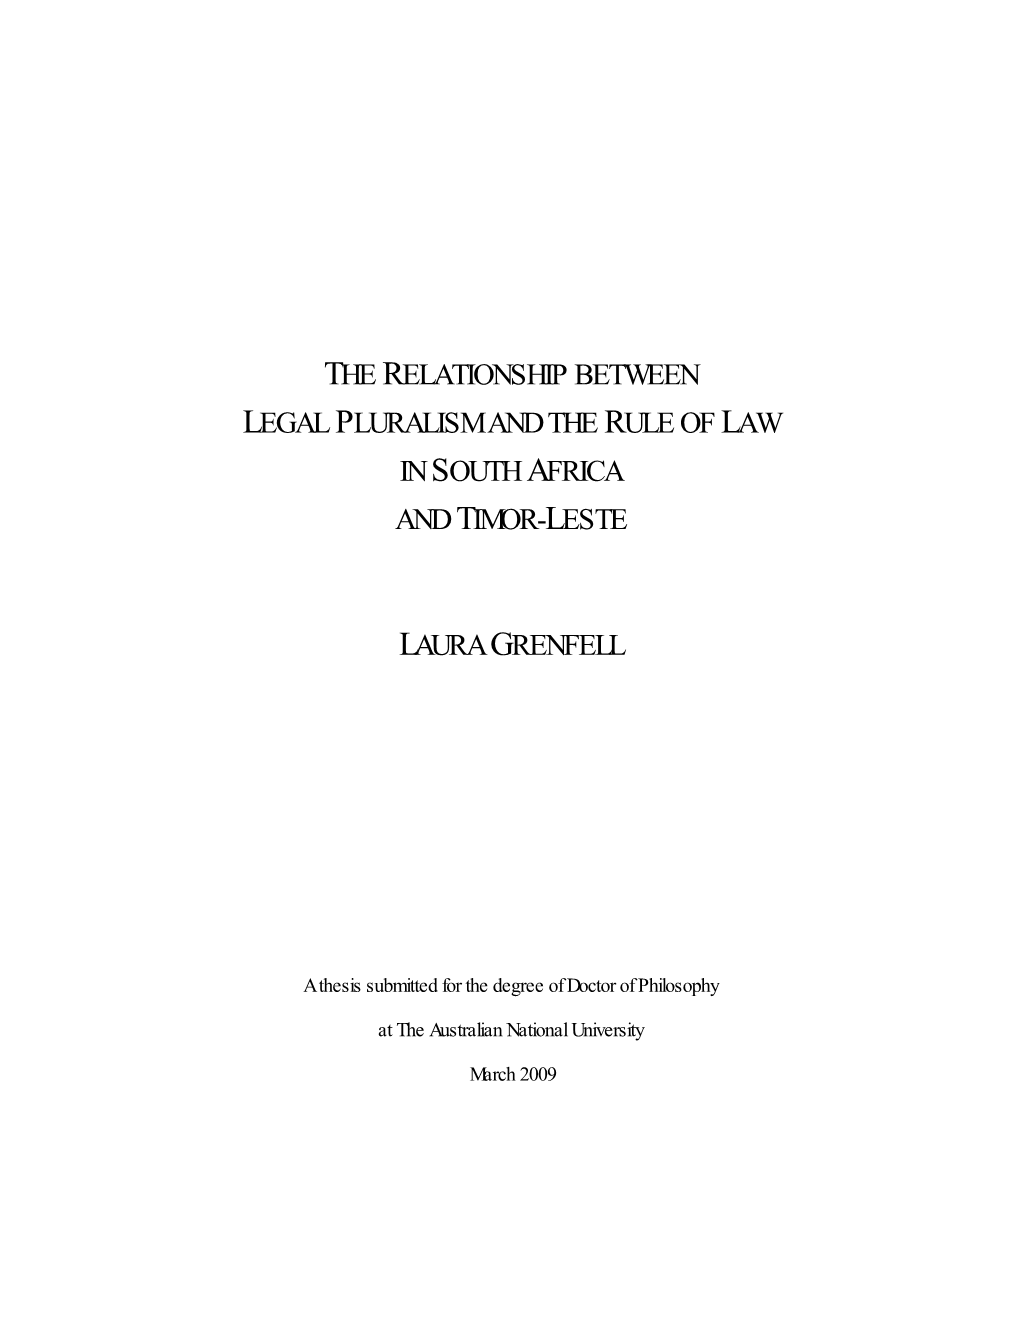 The Relationship Between Legal Pluralism and the Rule of Law in South Africa and Timor-Leste